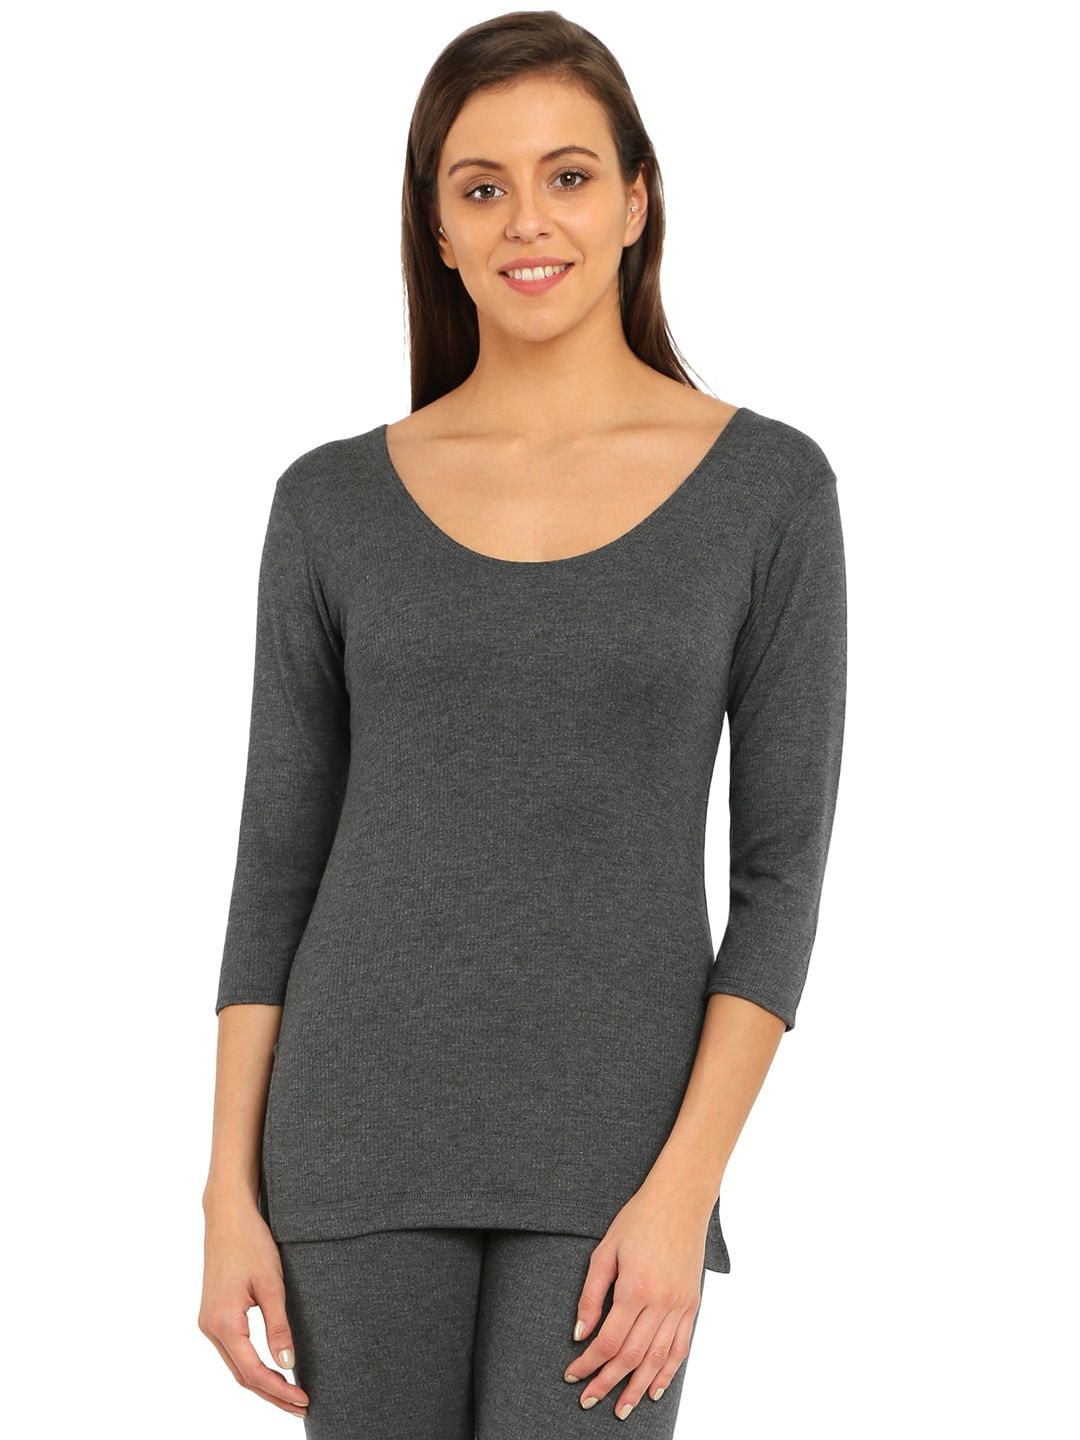 Jockey Women Charcoal Grey Solid Thermal Top Price in India